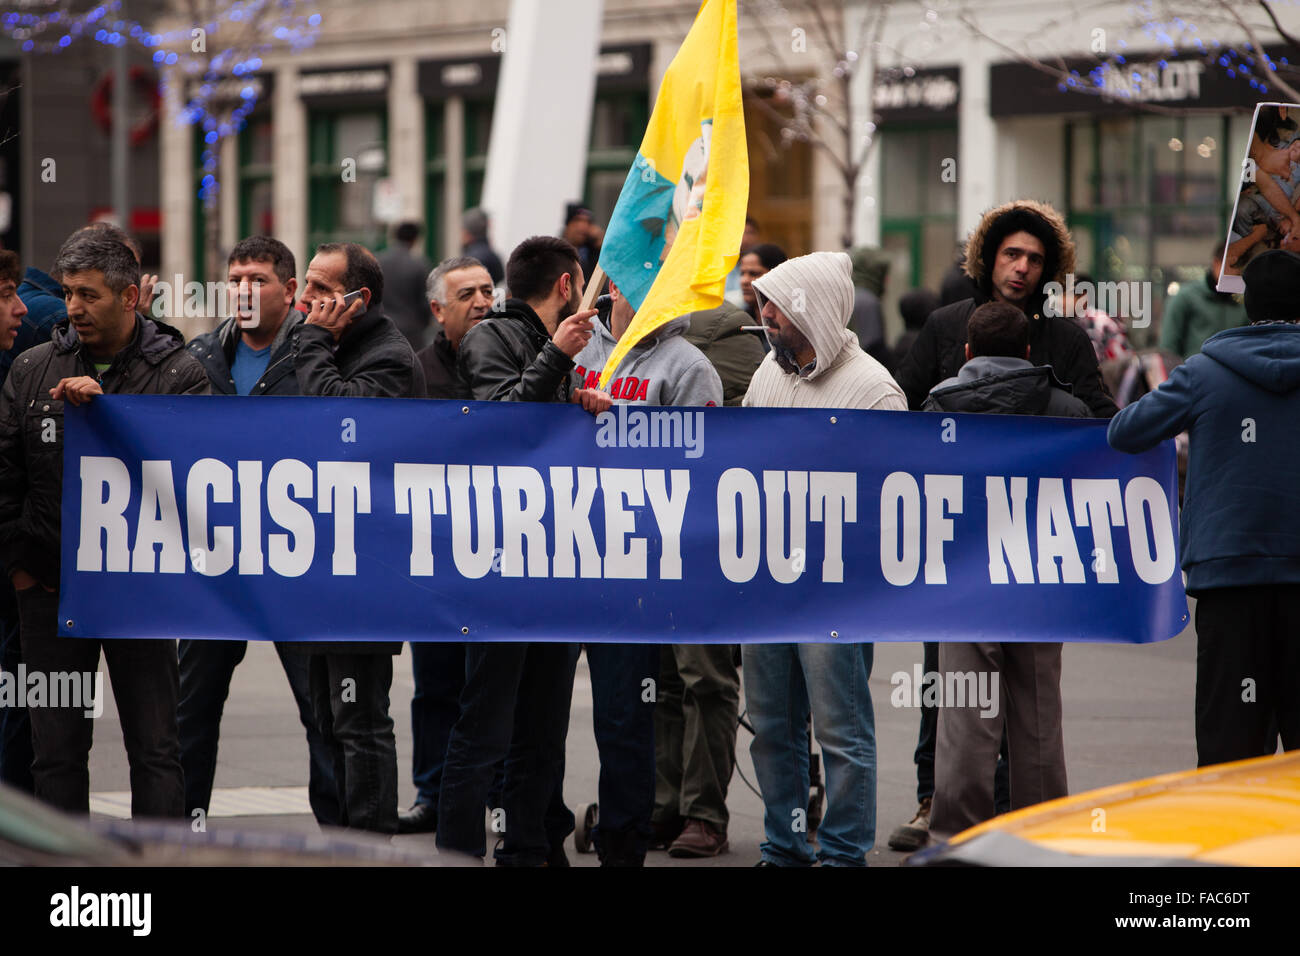 Kurdish Canadians holding 'Racist Turkey out of NATO' banner, protesting against Turkish politic Stock Photo